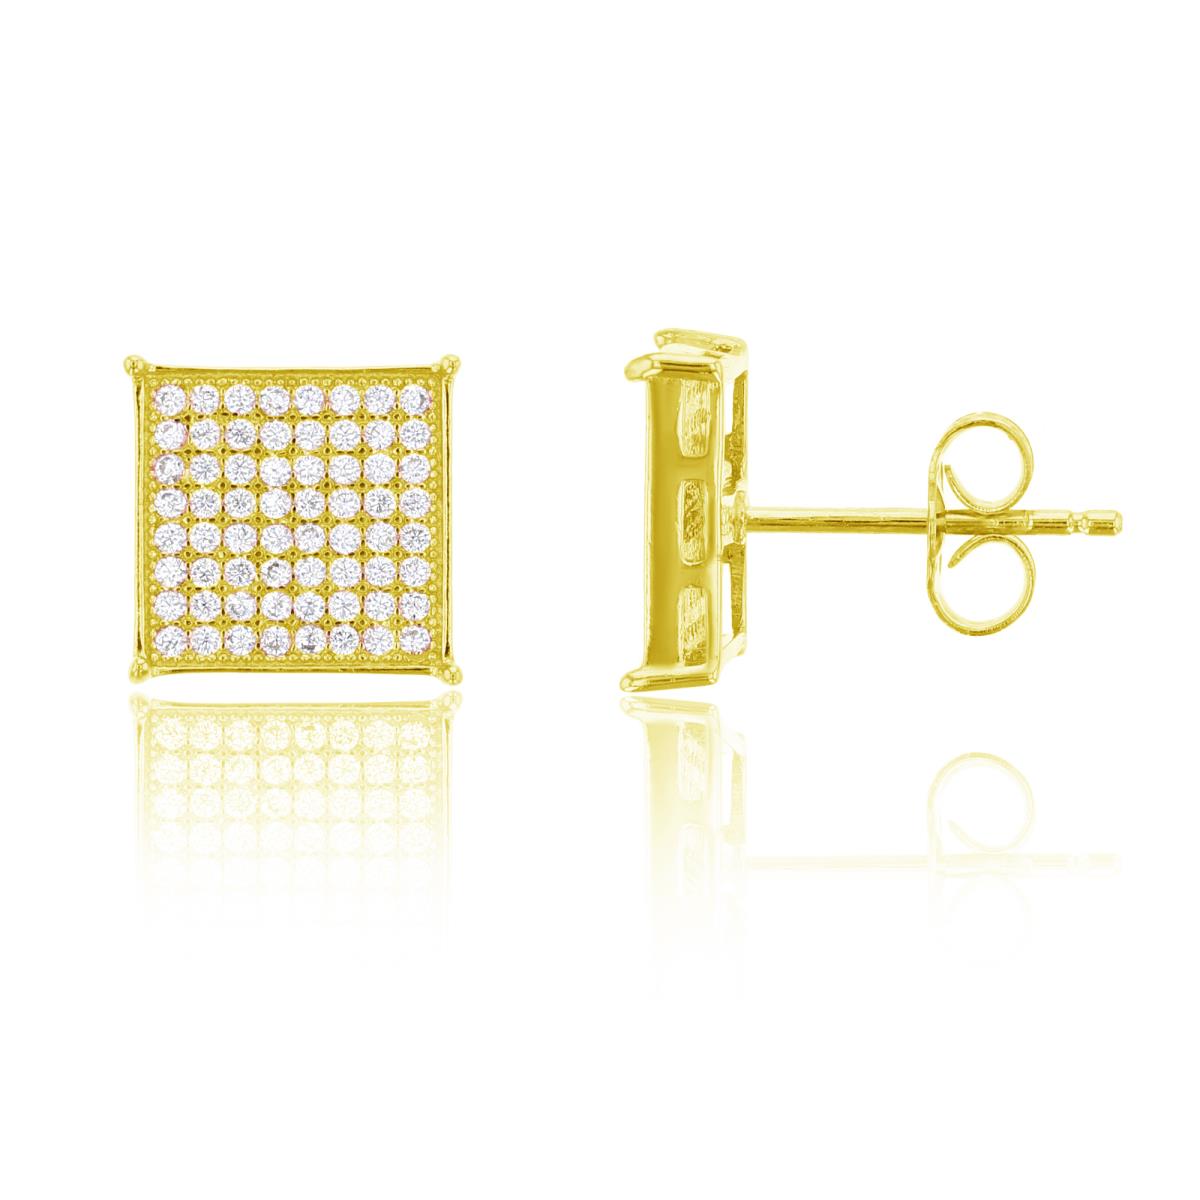 Sterling Silver Yellow 10x10mm Square Micropave Stud Earring